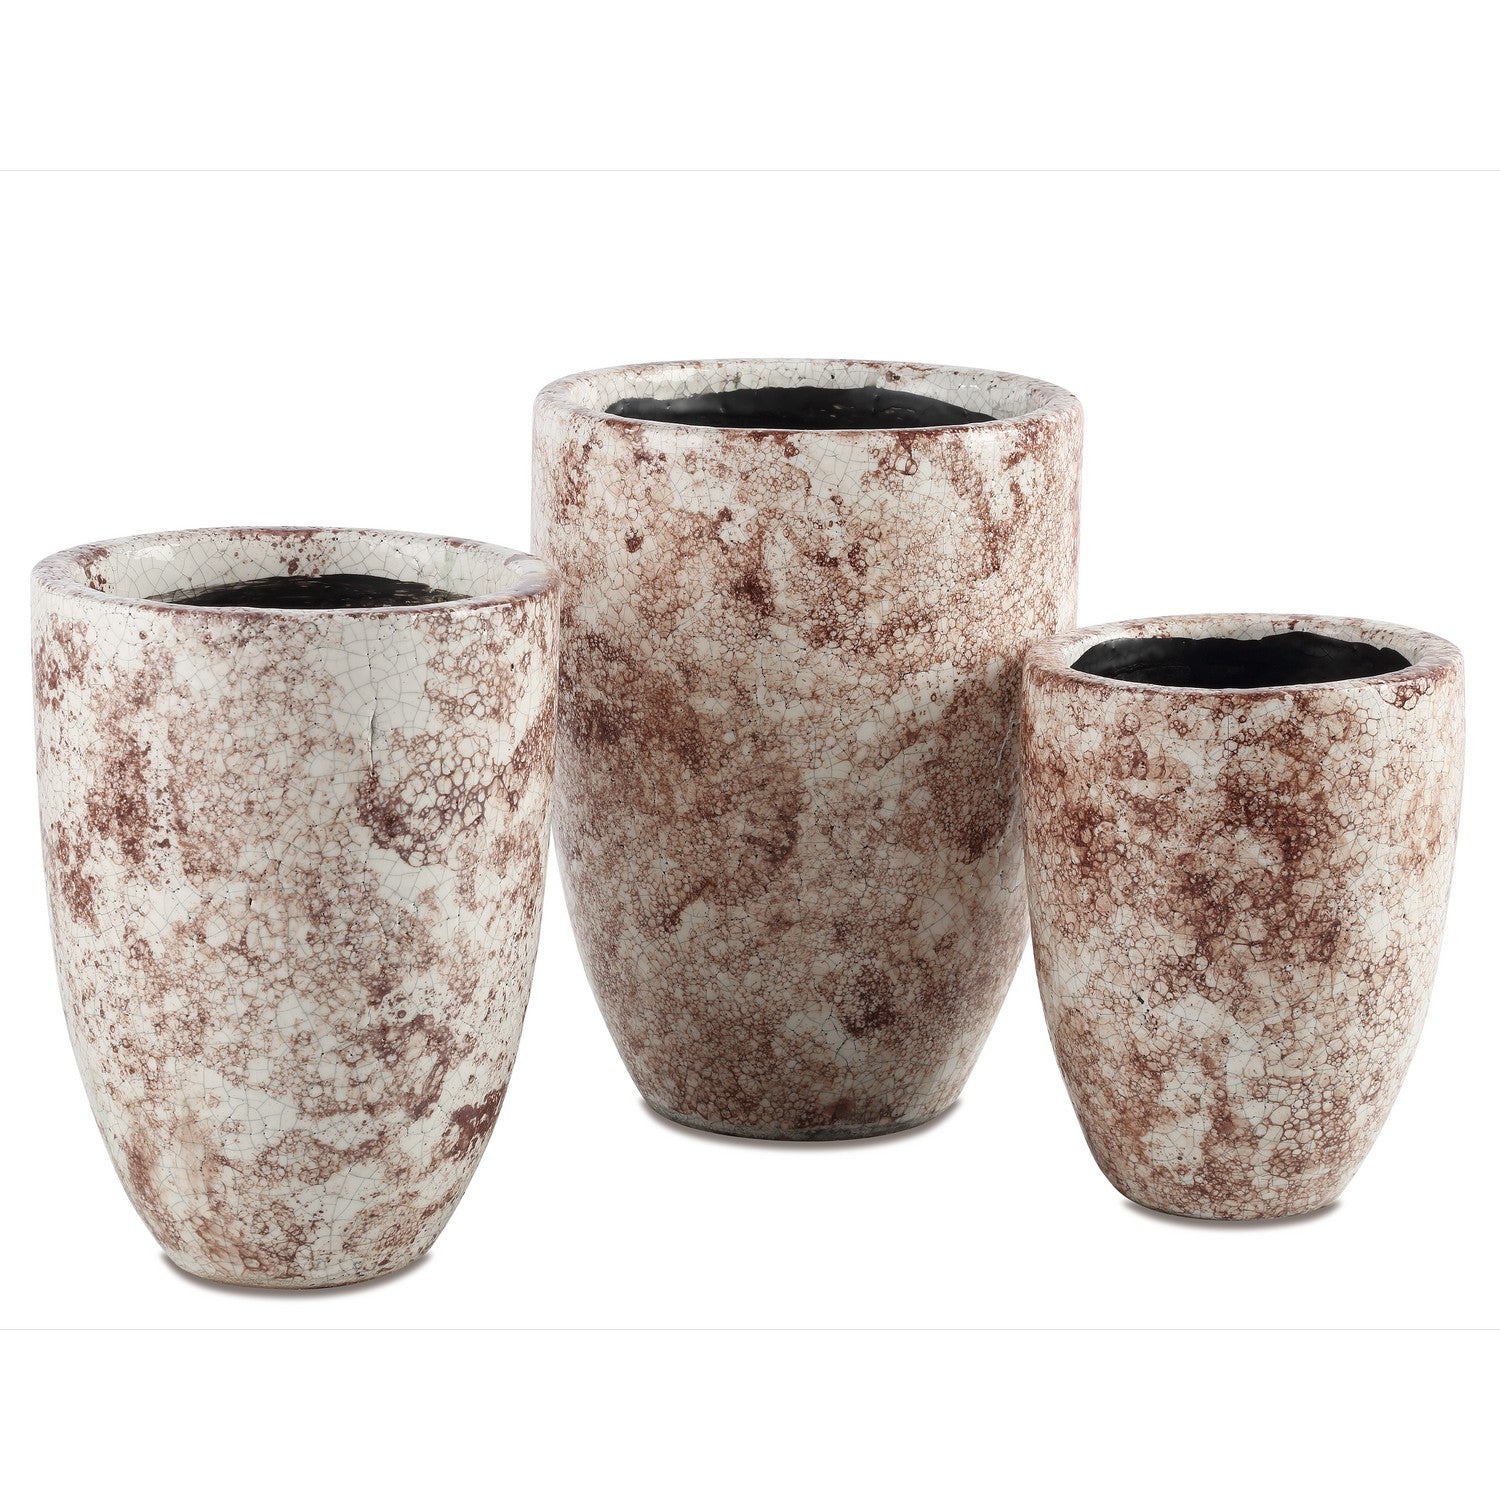 Currey and Company - 1200-0715 - Vase Set of 3 - Brown/Off White